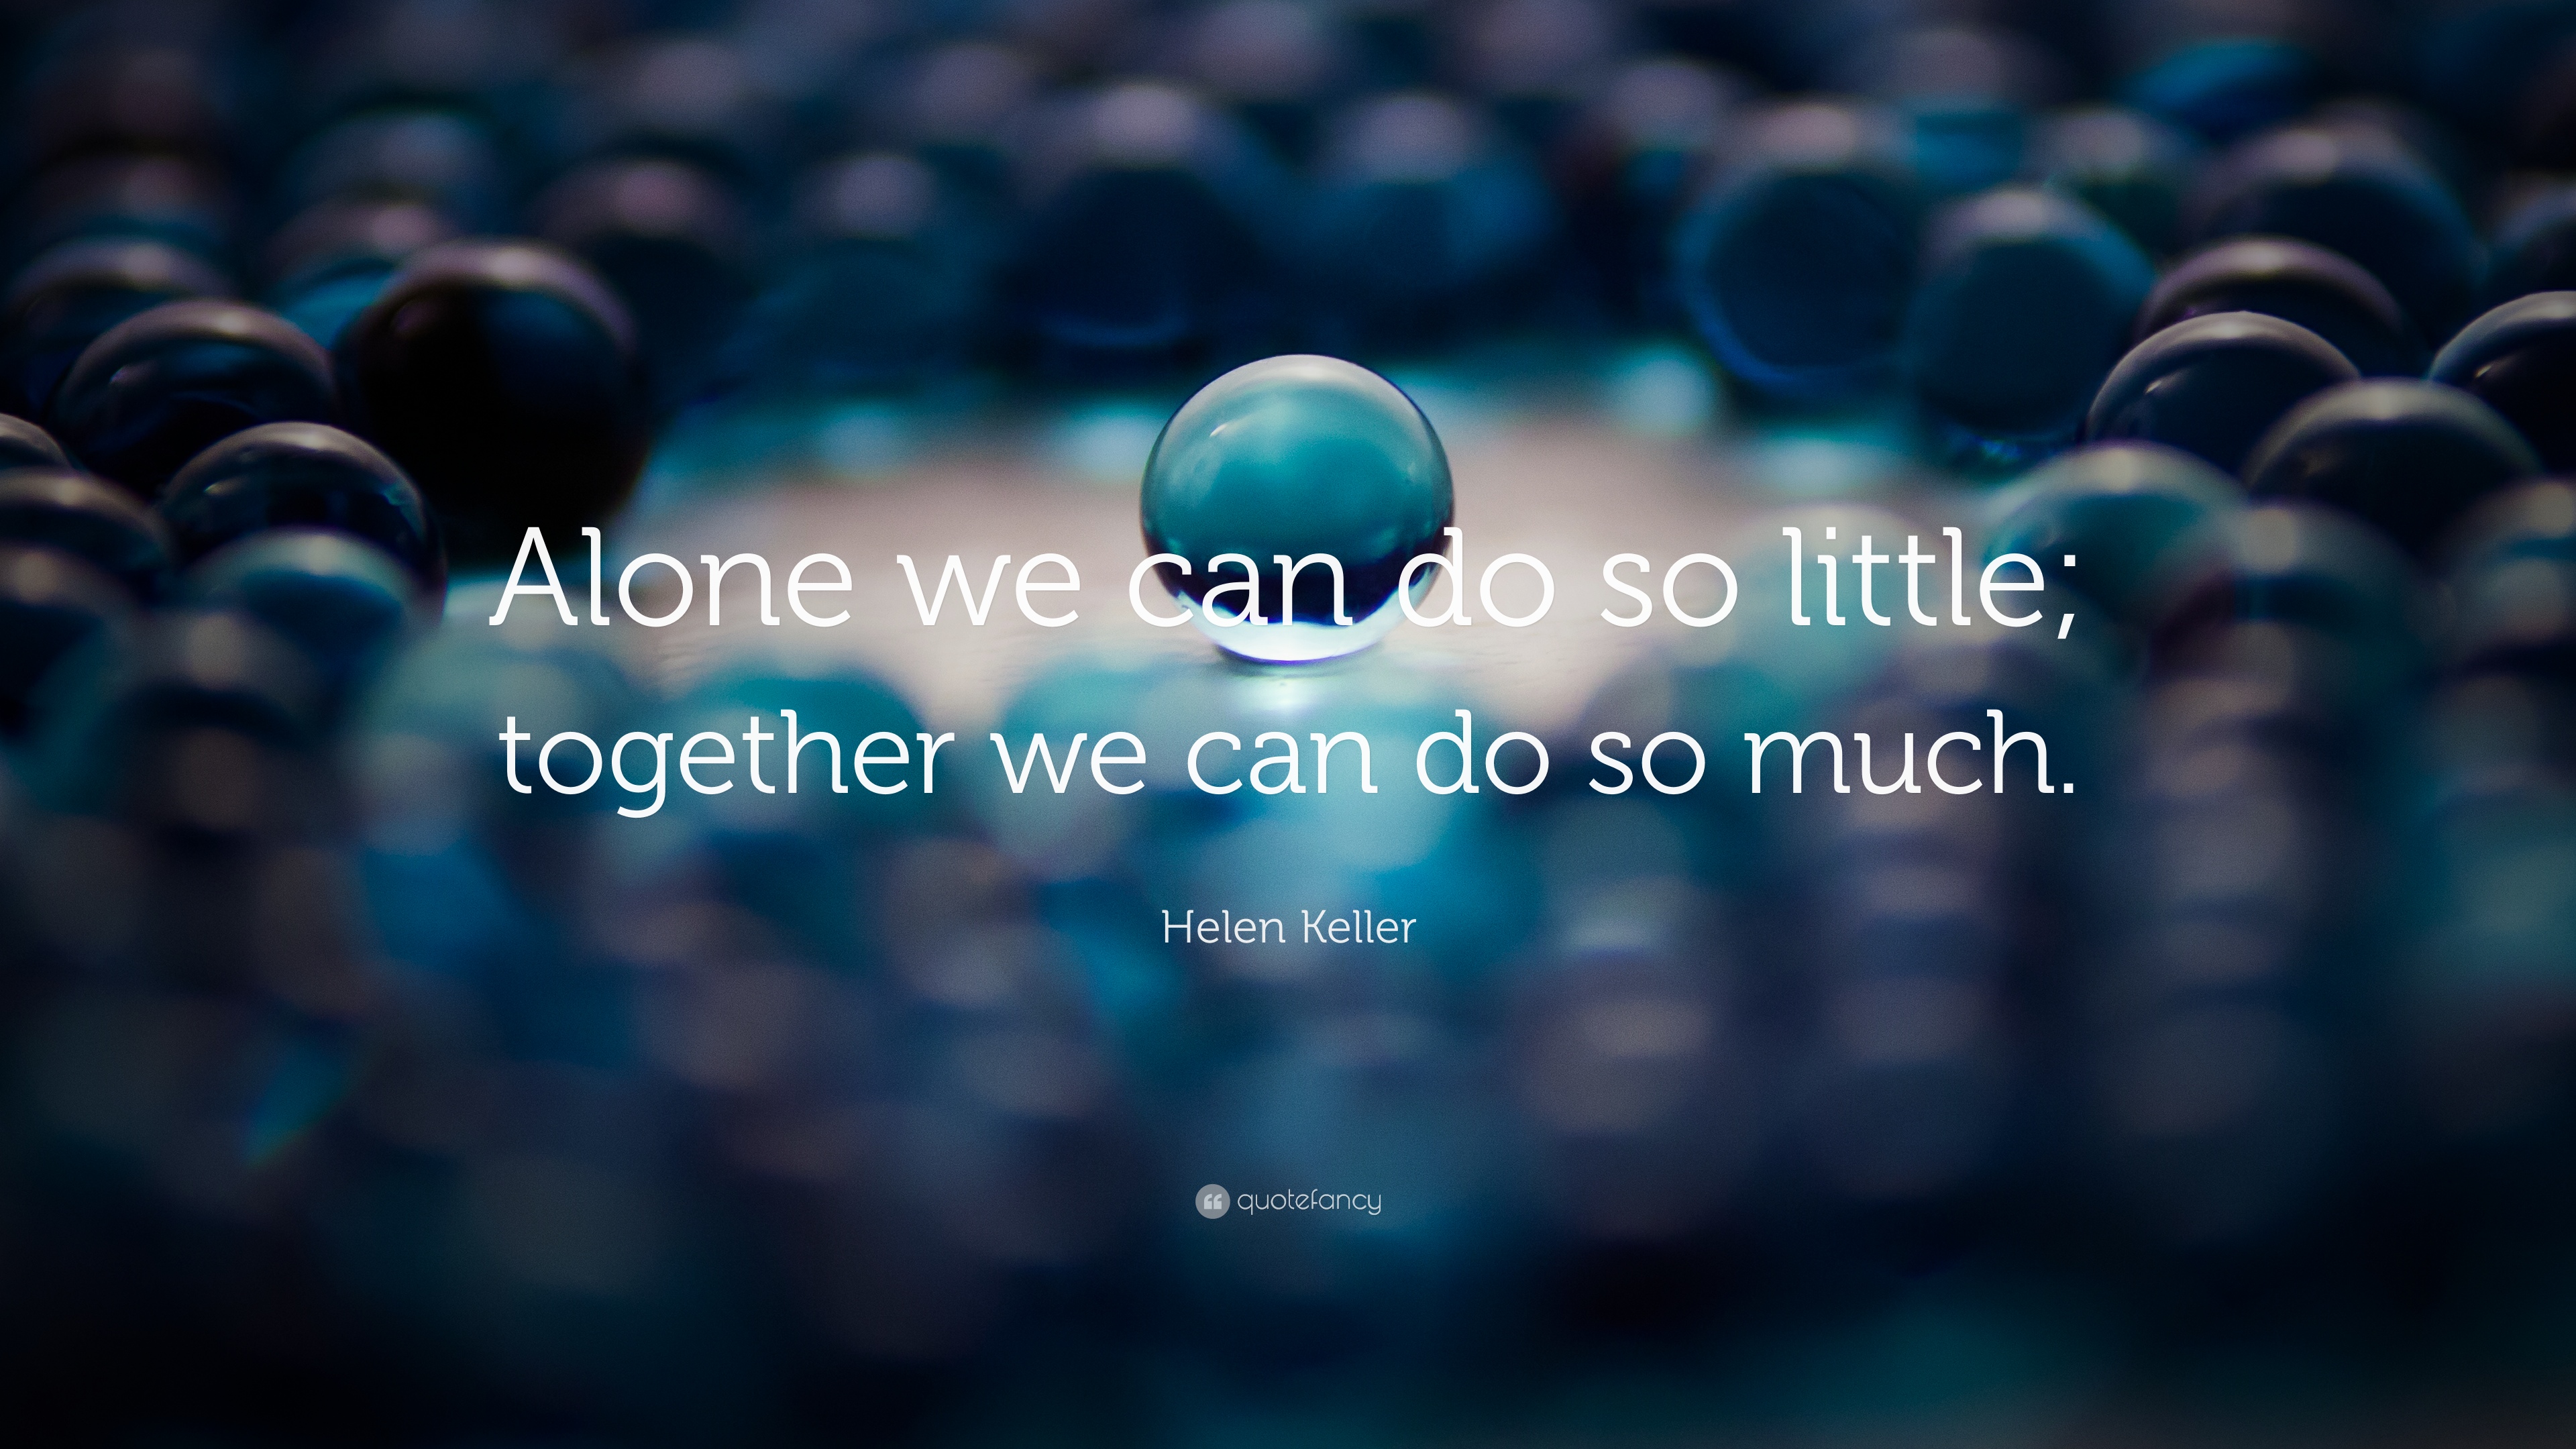 Helen Keller Quote: “Alone we can do so little; together we can do ...